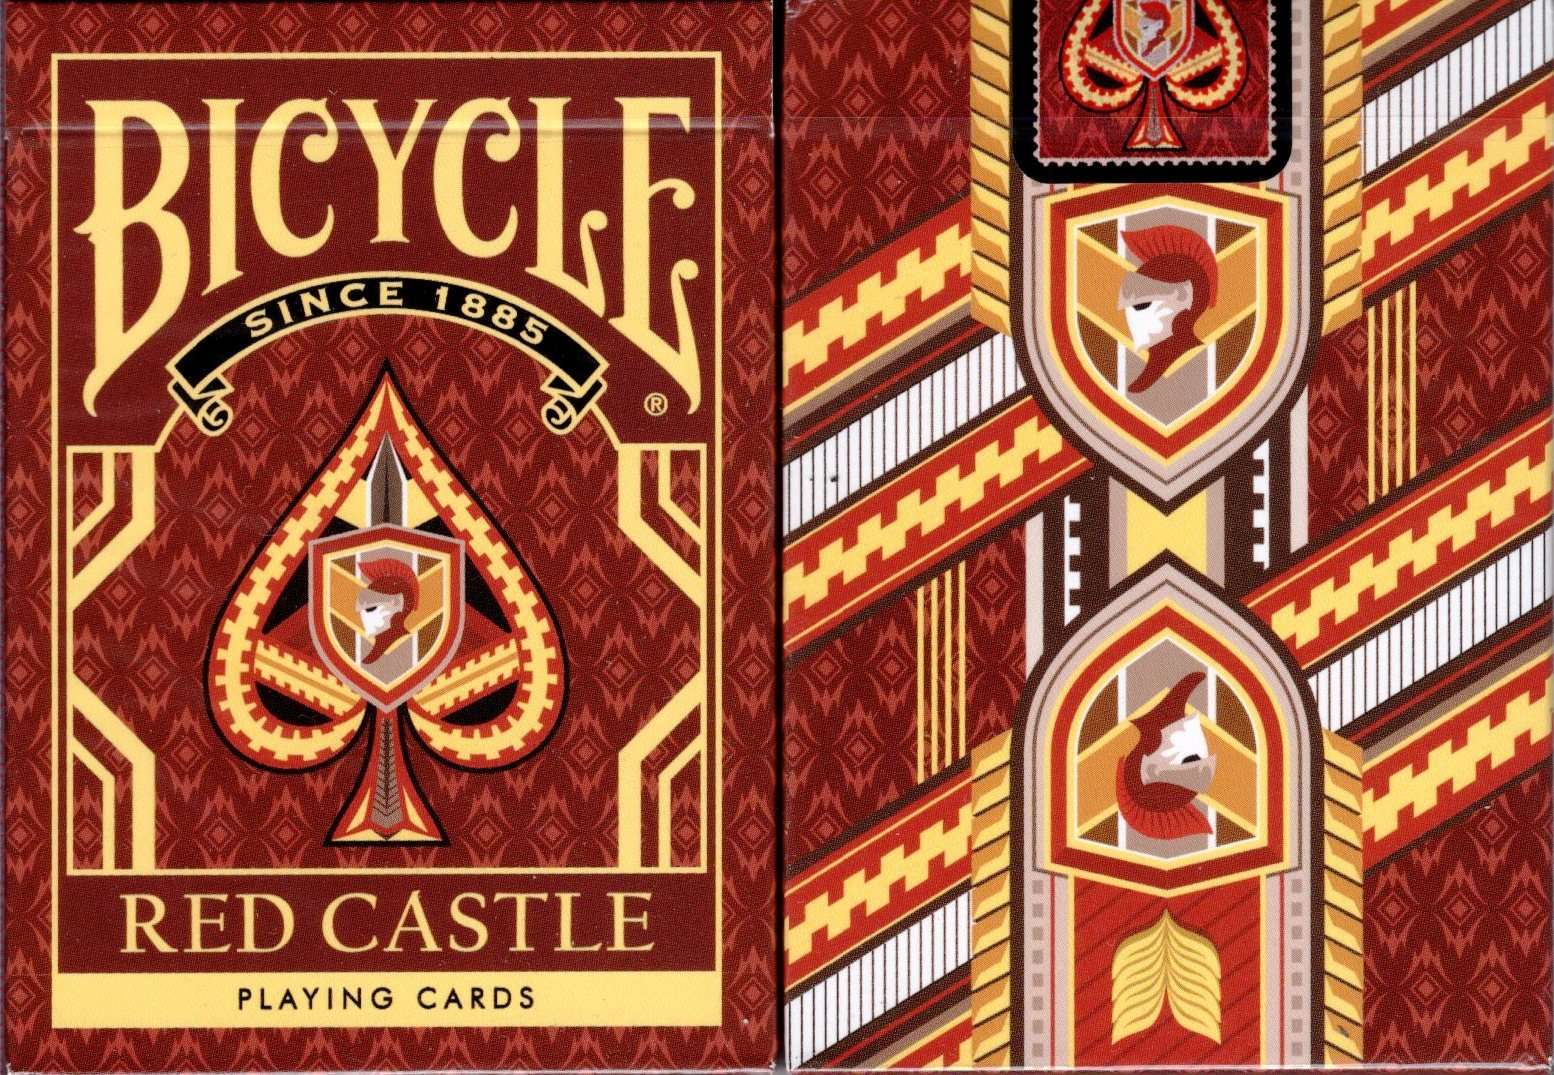 PlayingCardDecks.com-Red Castle Bicycle Playing Cards